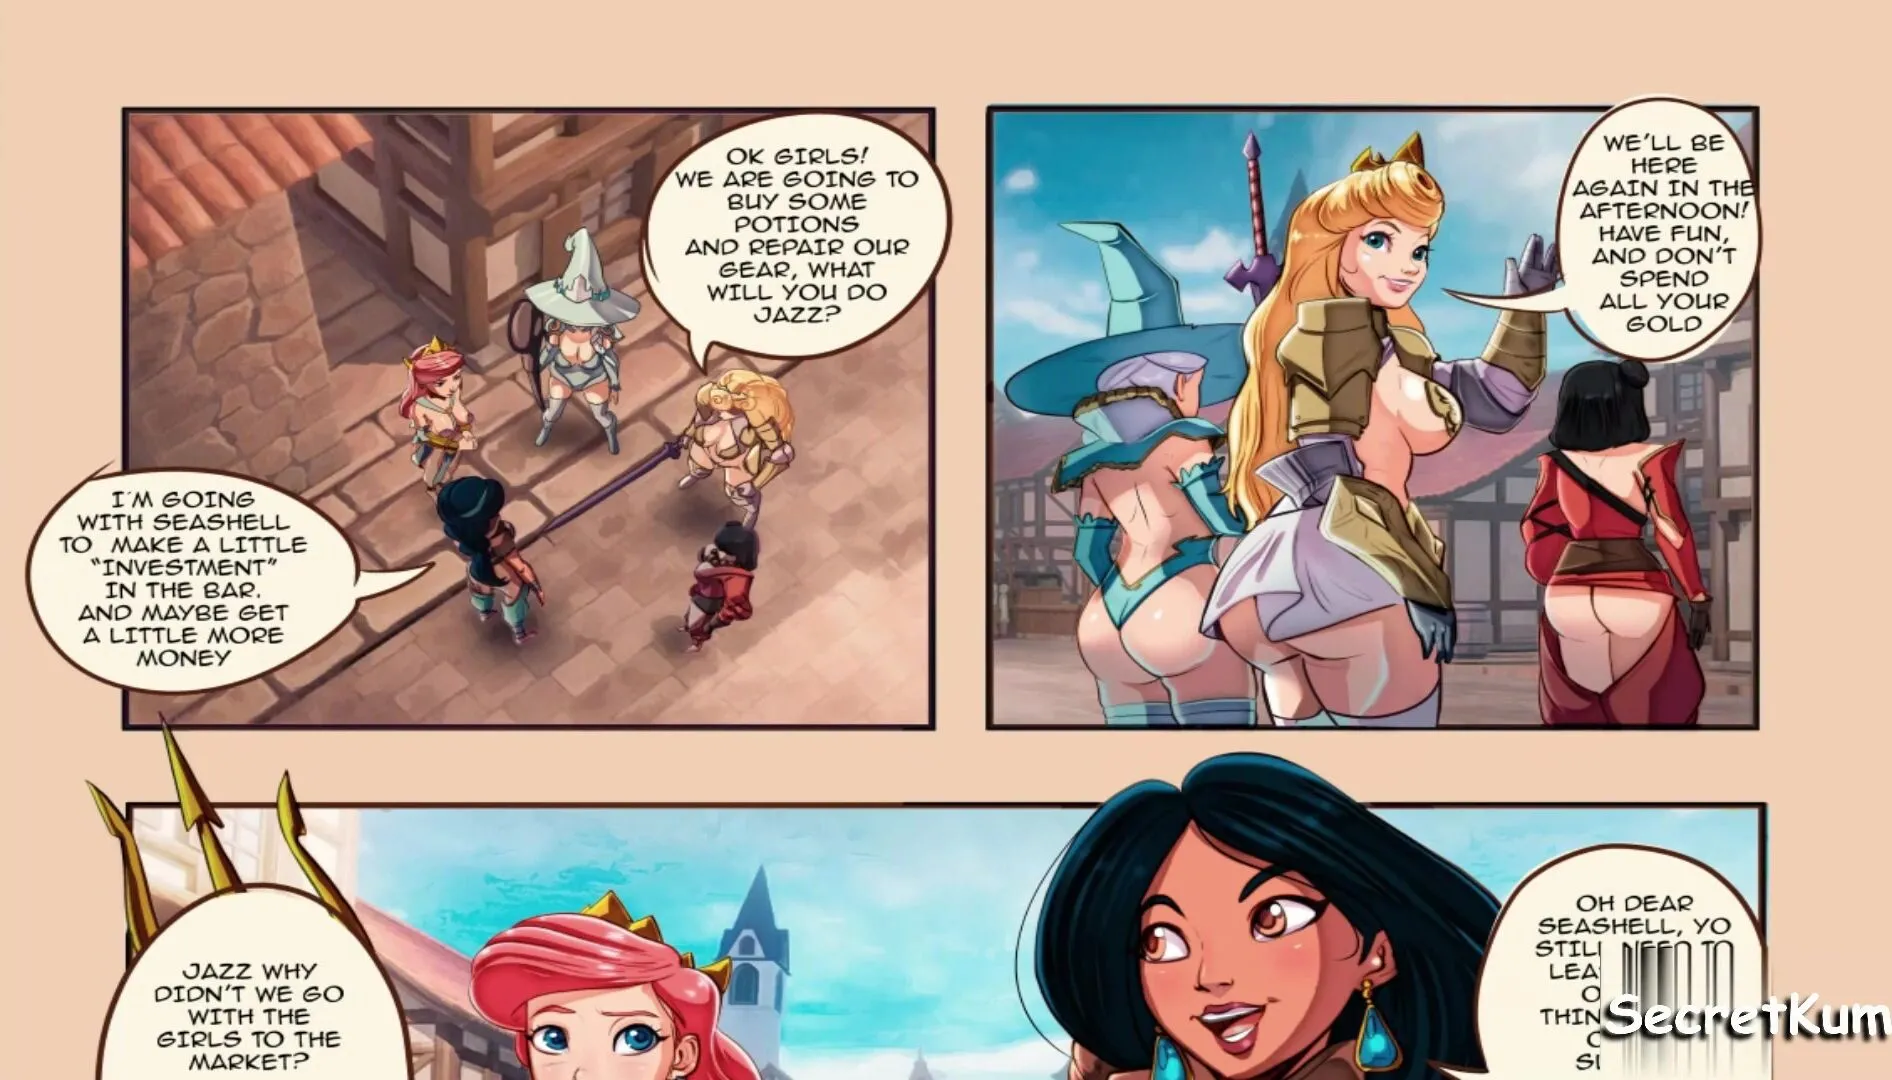 Disney Fairies Porn Anal - Free Disney Princess Quest - Disney toon characters Sexy Anal Fuckfest at  the Gambling Table Porn Video - Ebony 8